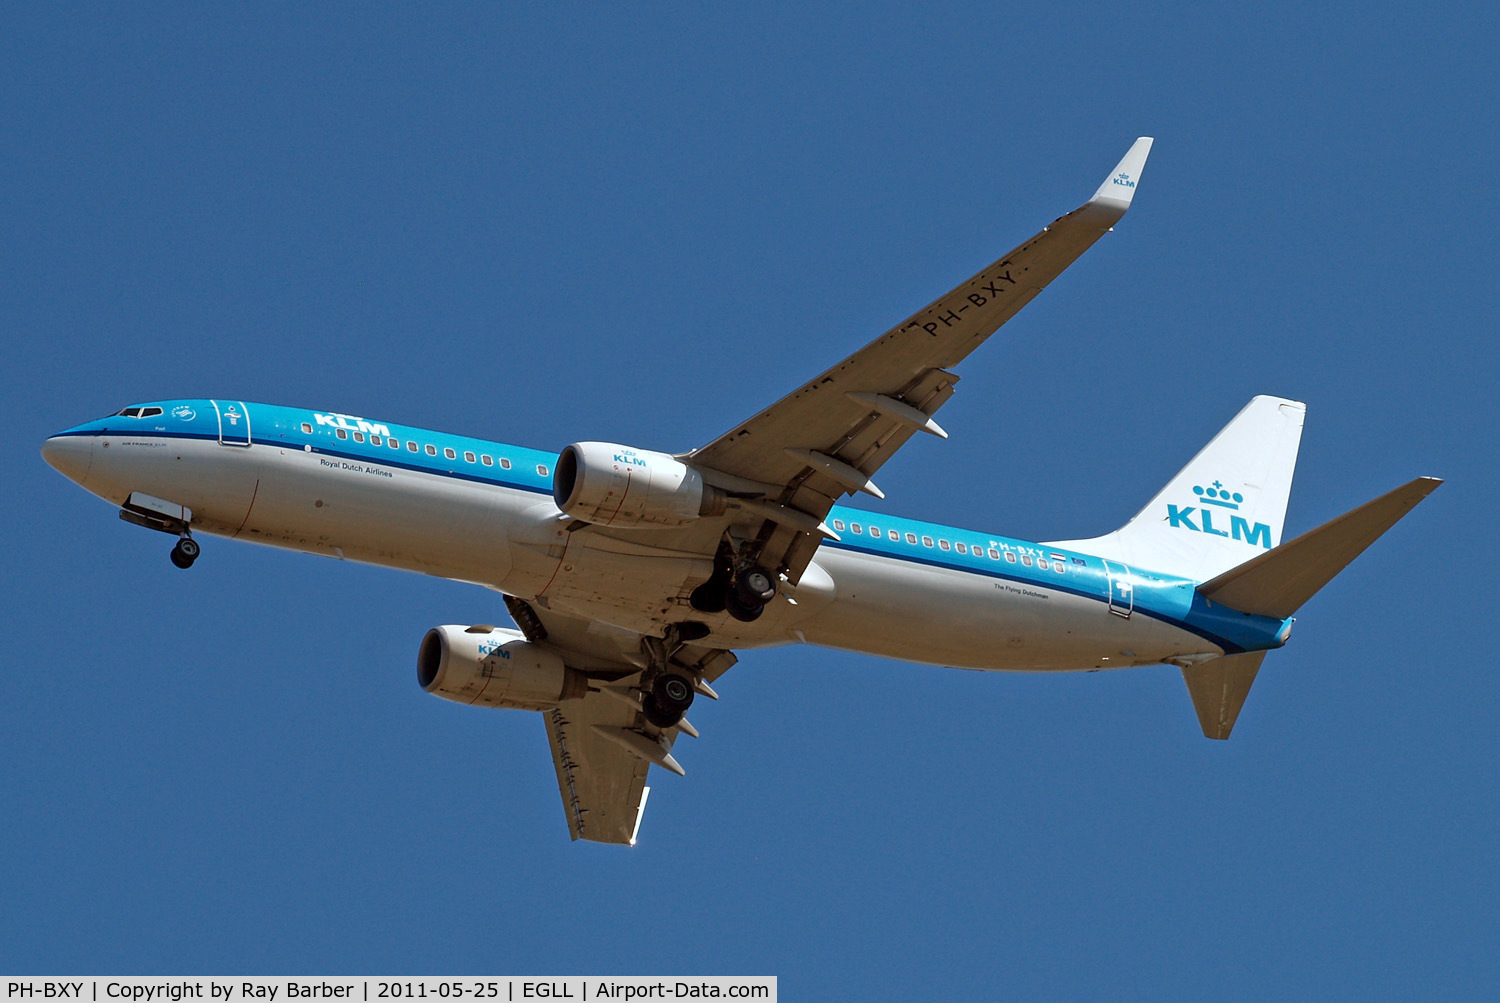 PH-BXY, 2008 Boeing 737-8K2 C/N 30372, Boeing 737-8K2 [30372] (KLM-Royal Dutch Airlines) Home~G 25/05/2011. On approach 27R.